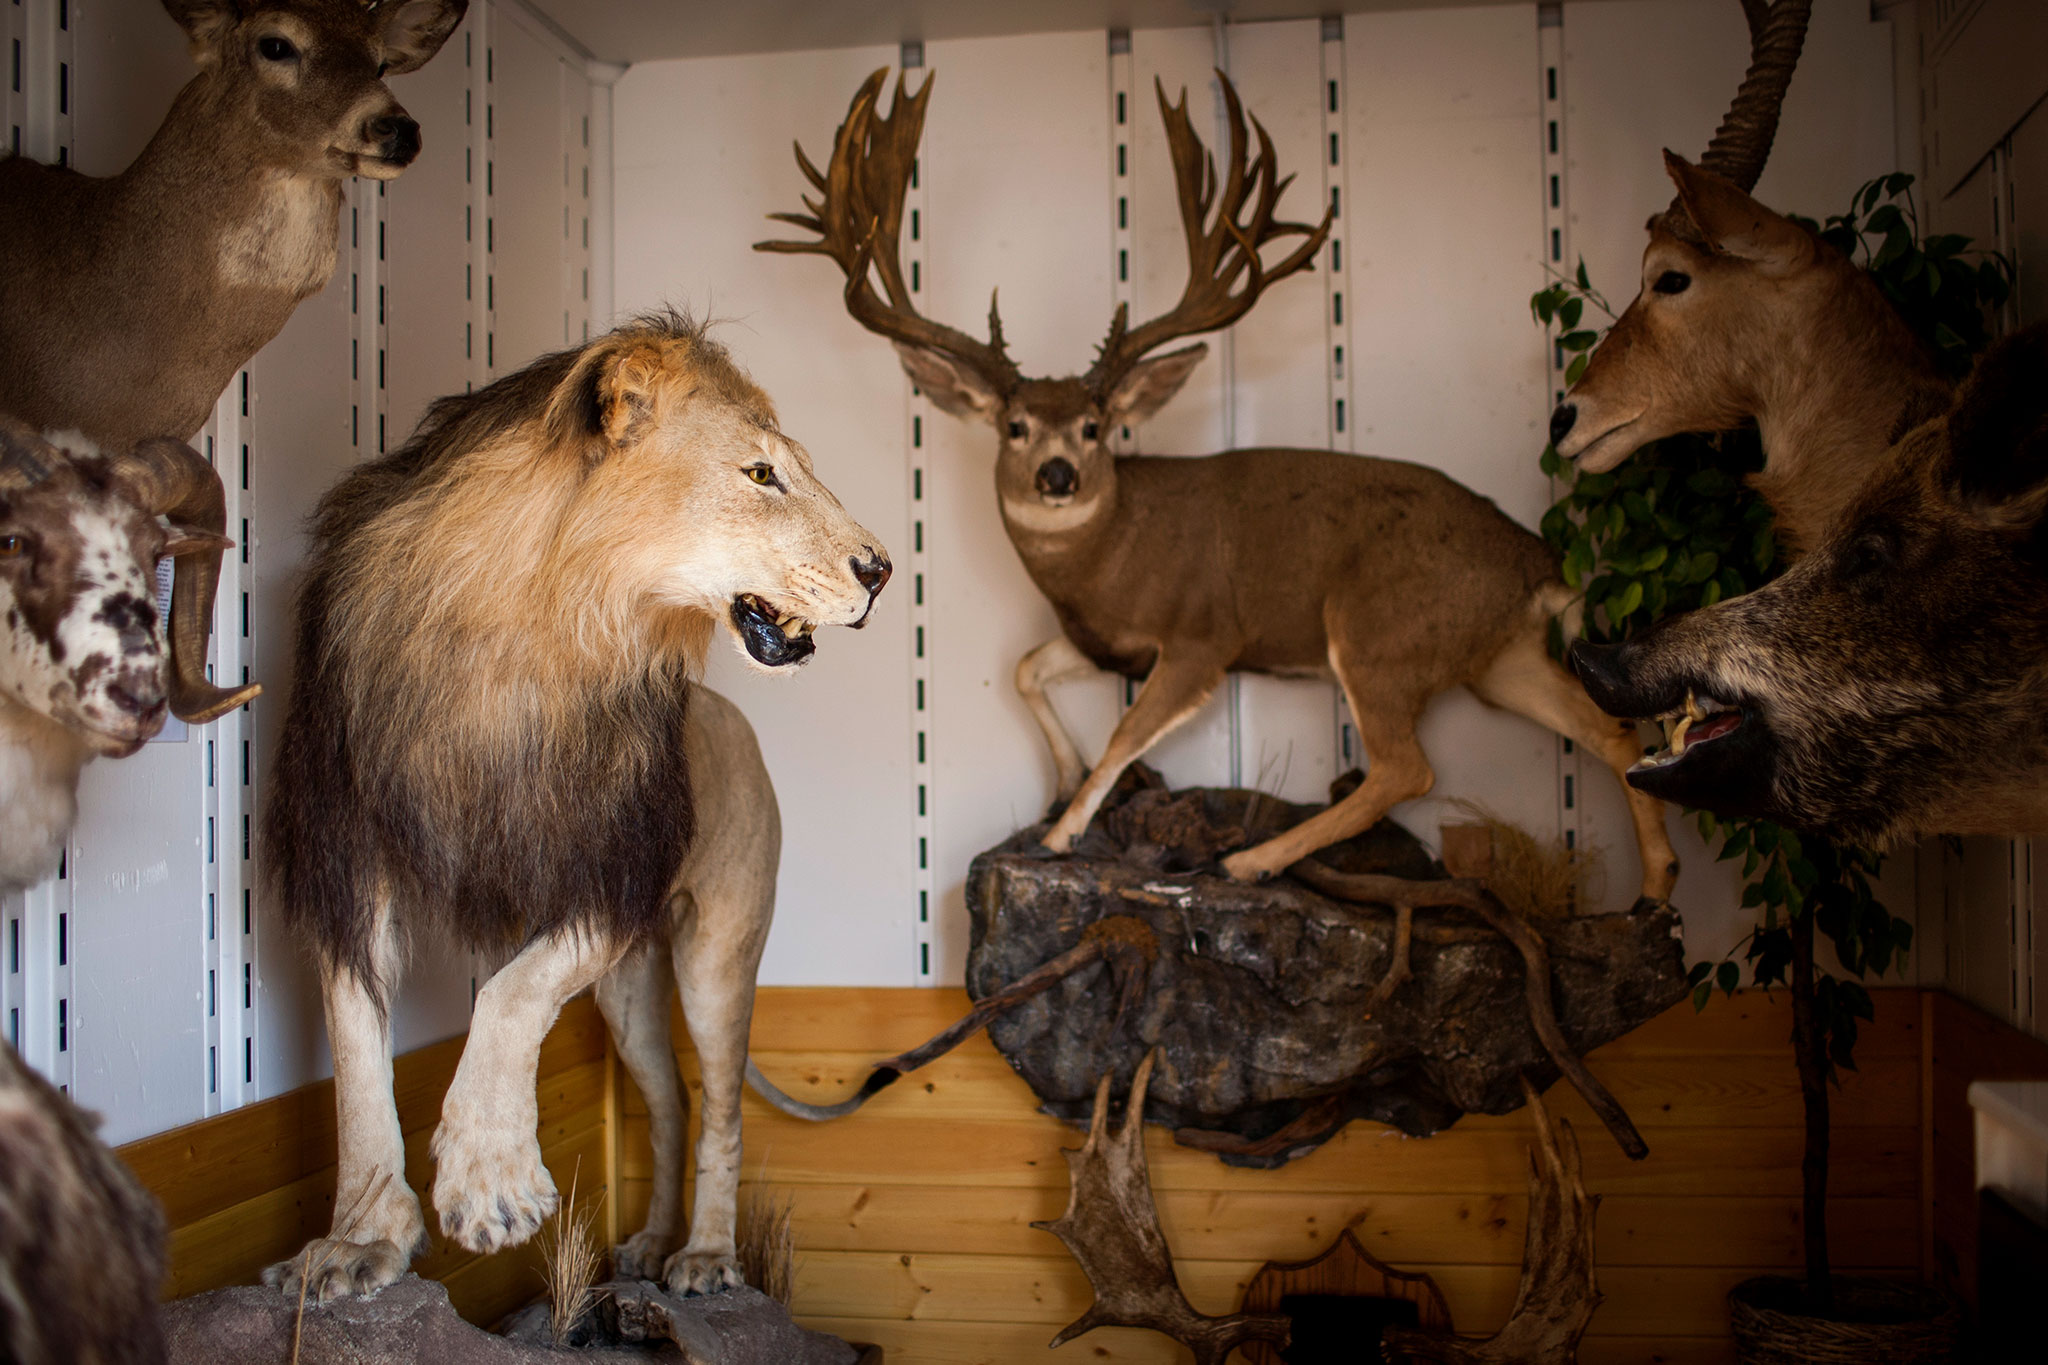 Exclusive: Hard Data Reveal Scale of America's Trophy-Hunting Habit